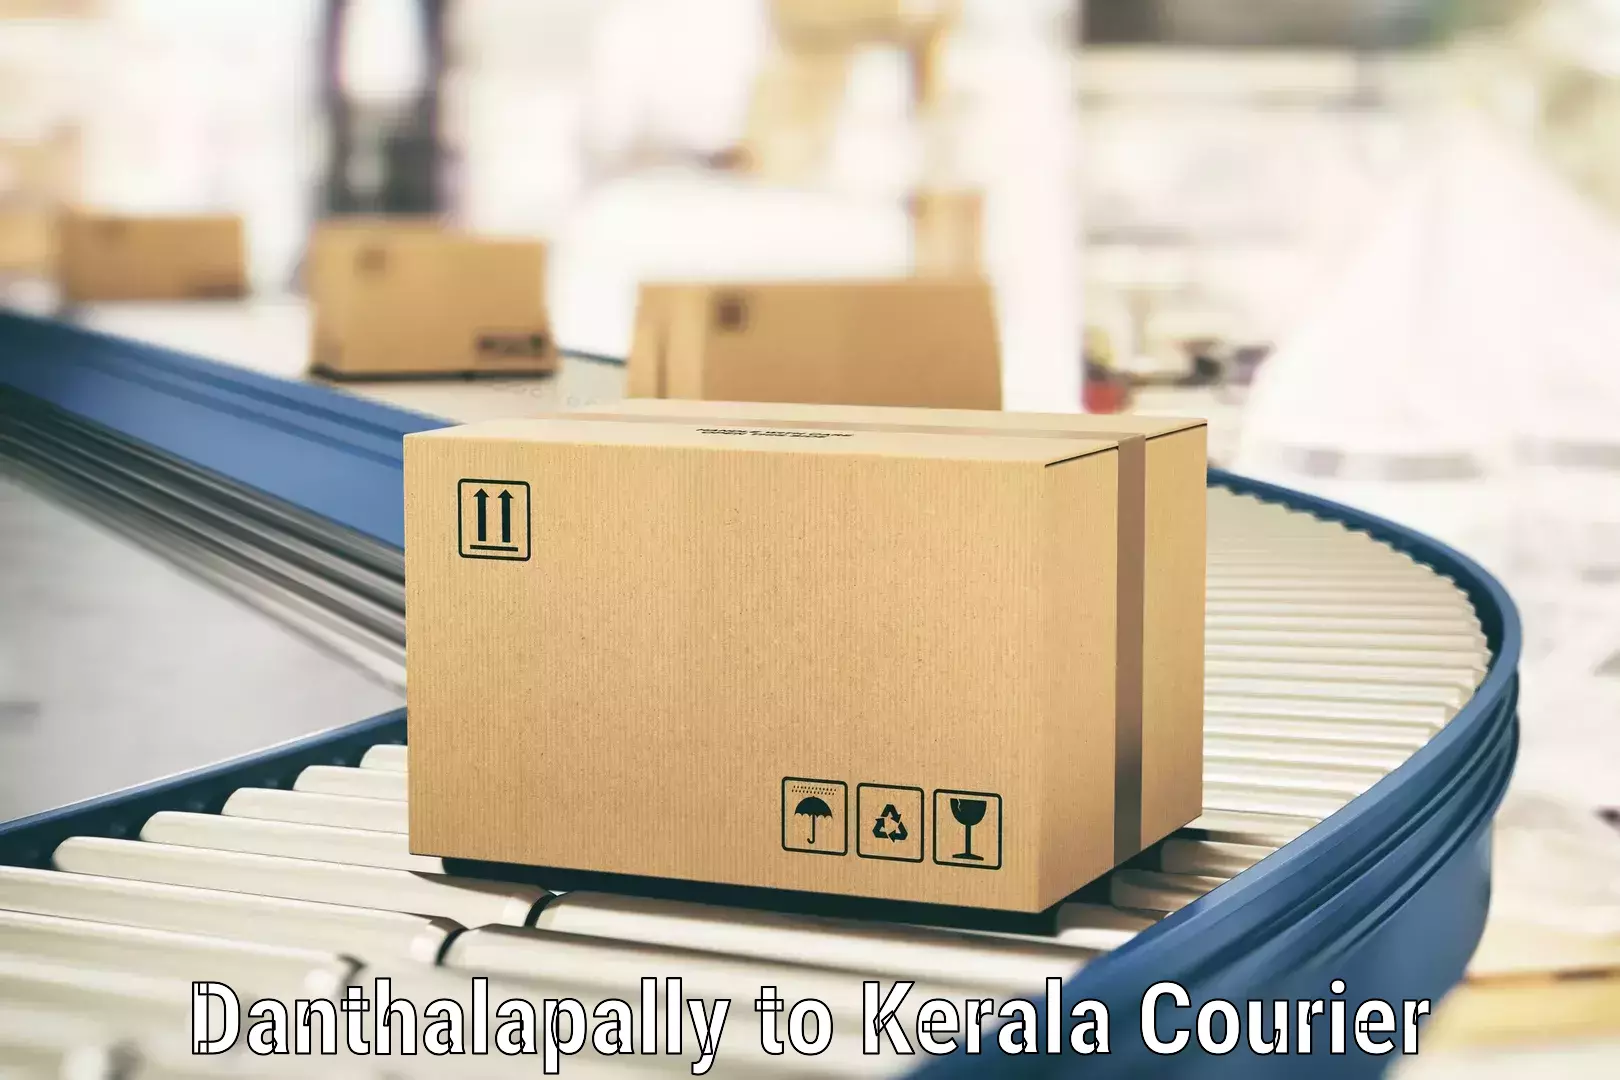 Local delivery service Danthalapally to Kottayam